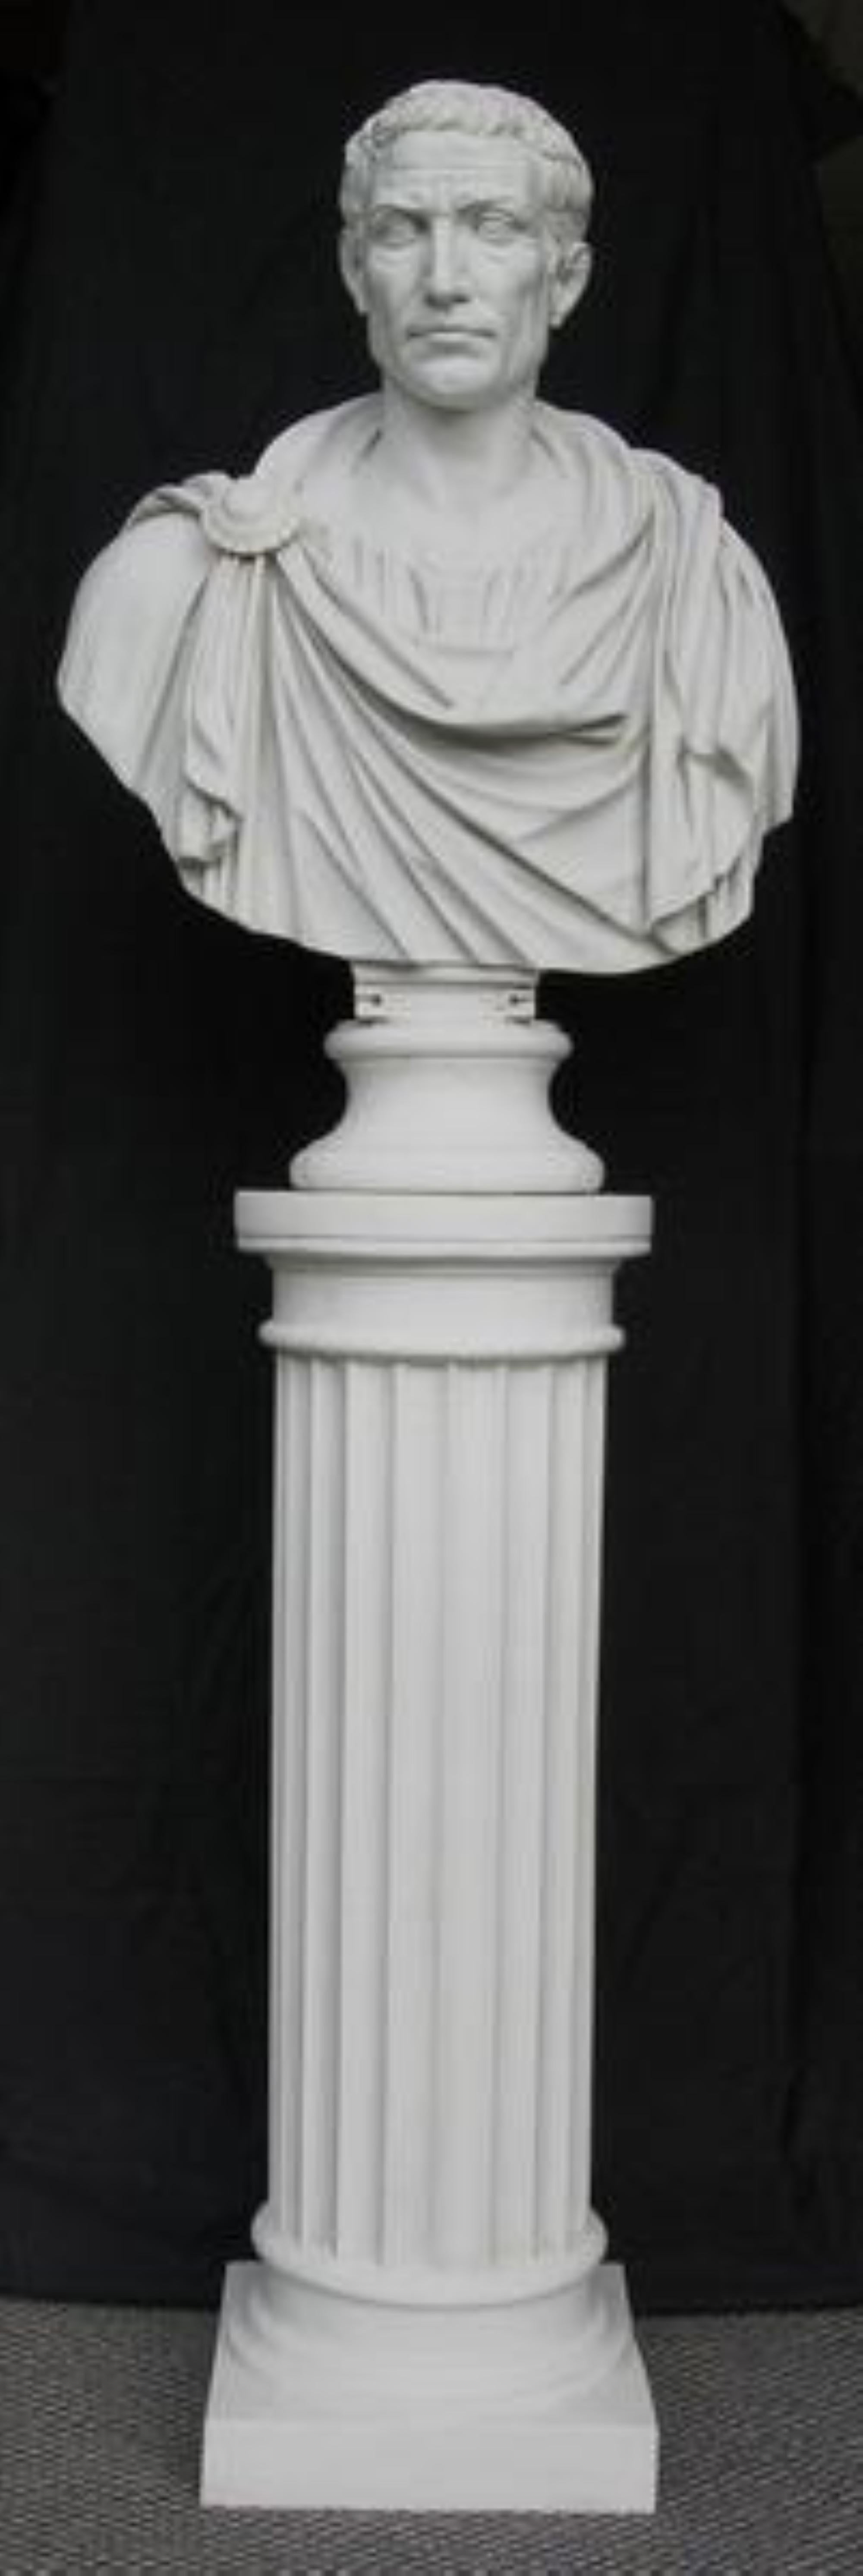 Julius Caesar bust sculpture, the Emperor wearing toga drapery.

A fine large library bust of Julius Caesar, probably the most famous of all Roman emperors.

Gaius Julius Caesar was a Roman general and statesman and a distinguished writer of